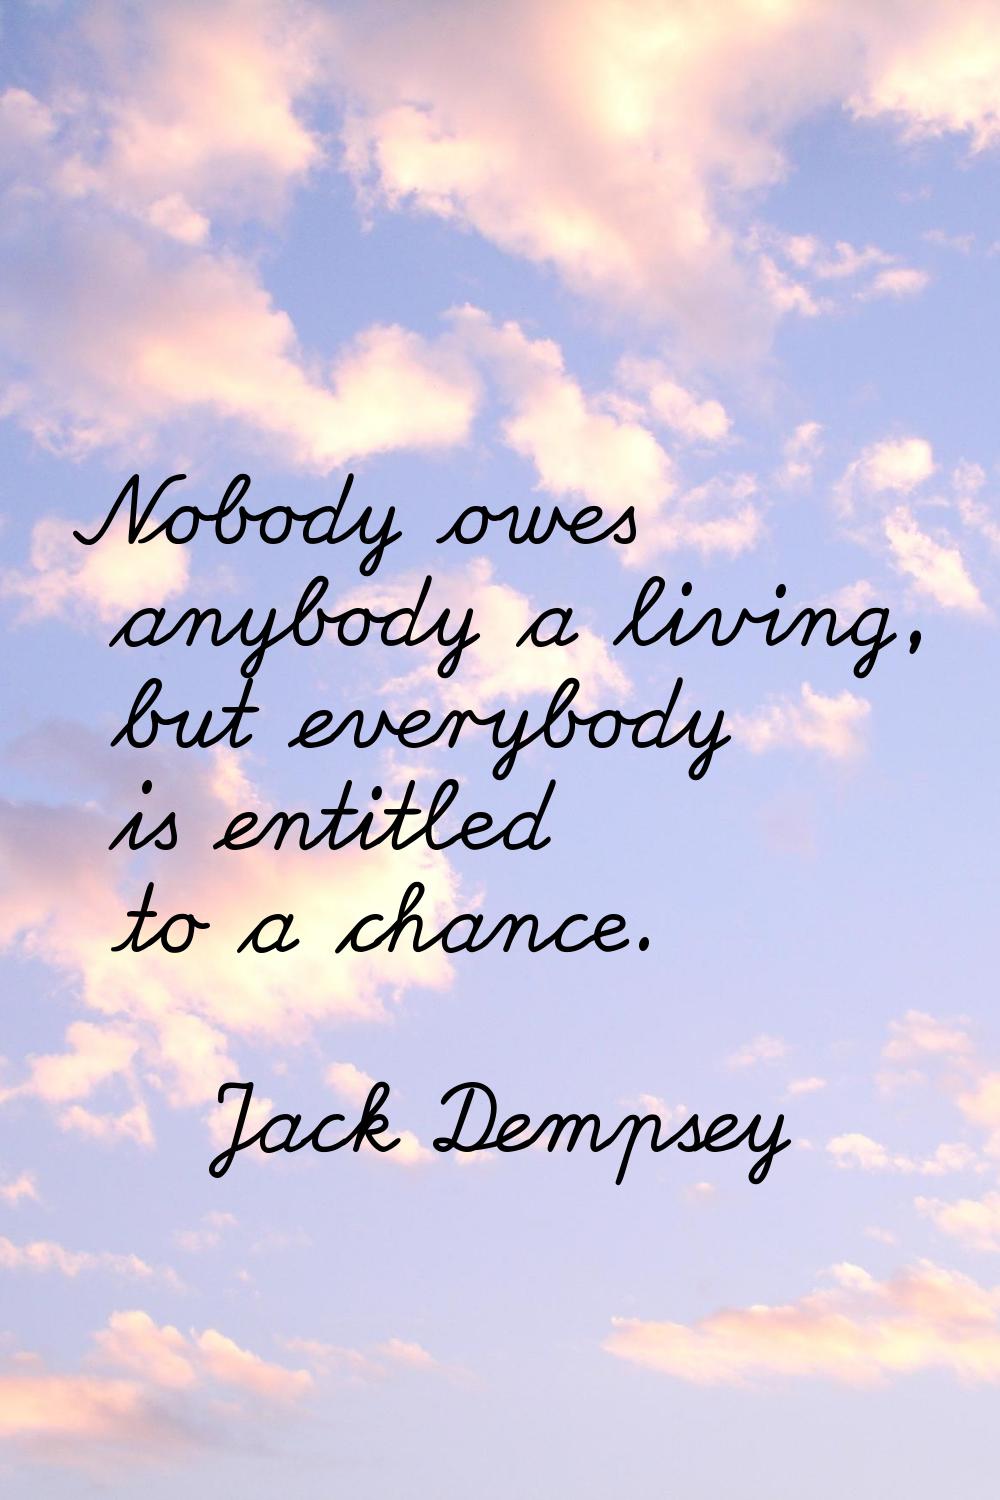 Nobody owes anybody a living, but everybody is entitled to a chance.